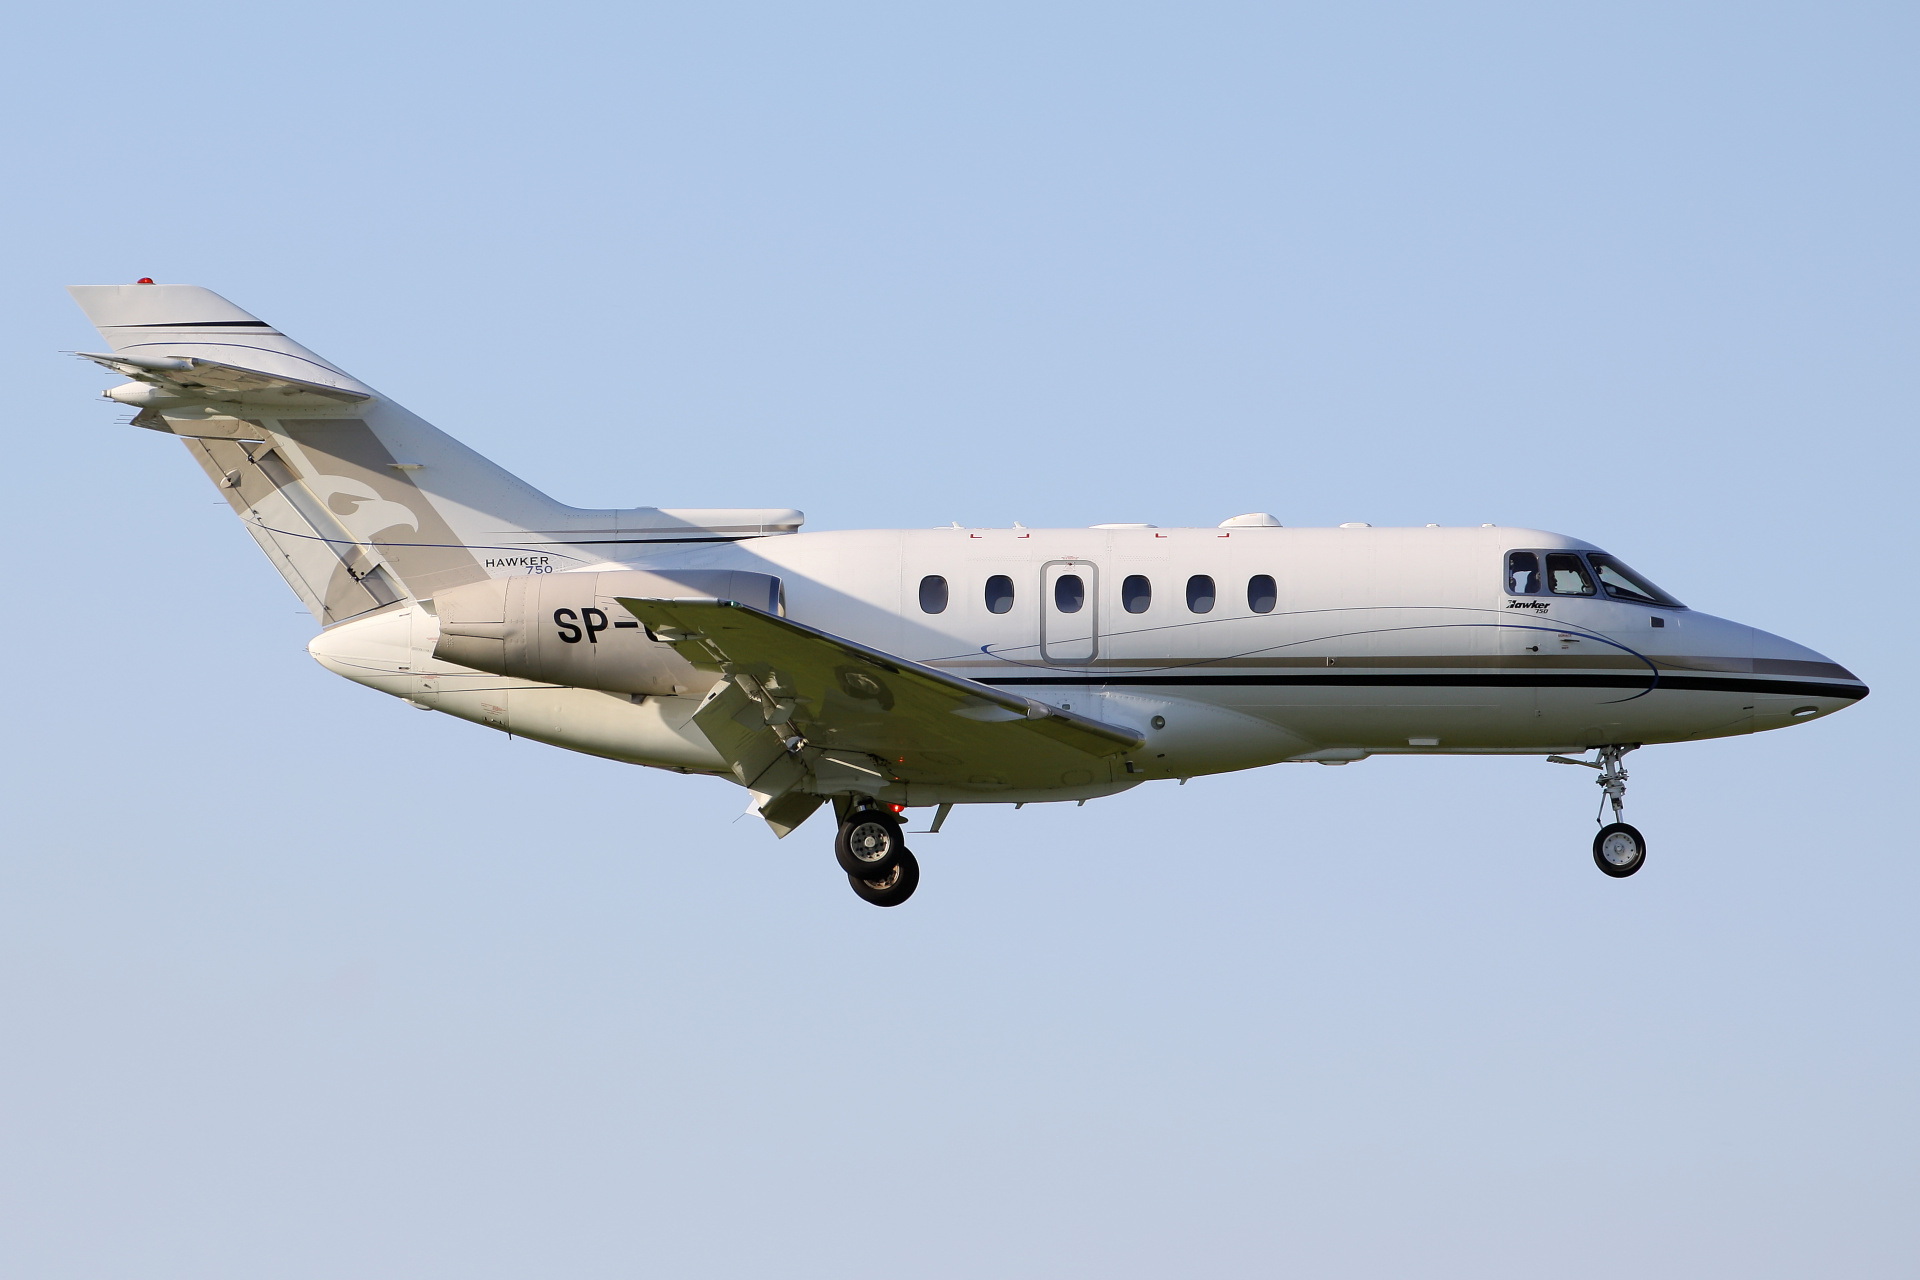 SP-CEO, Jet Story (Aircraft » EPWA Spotting » BAe 125 and revisions » Raytheon Hawker 750)